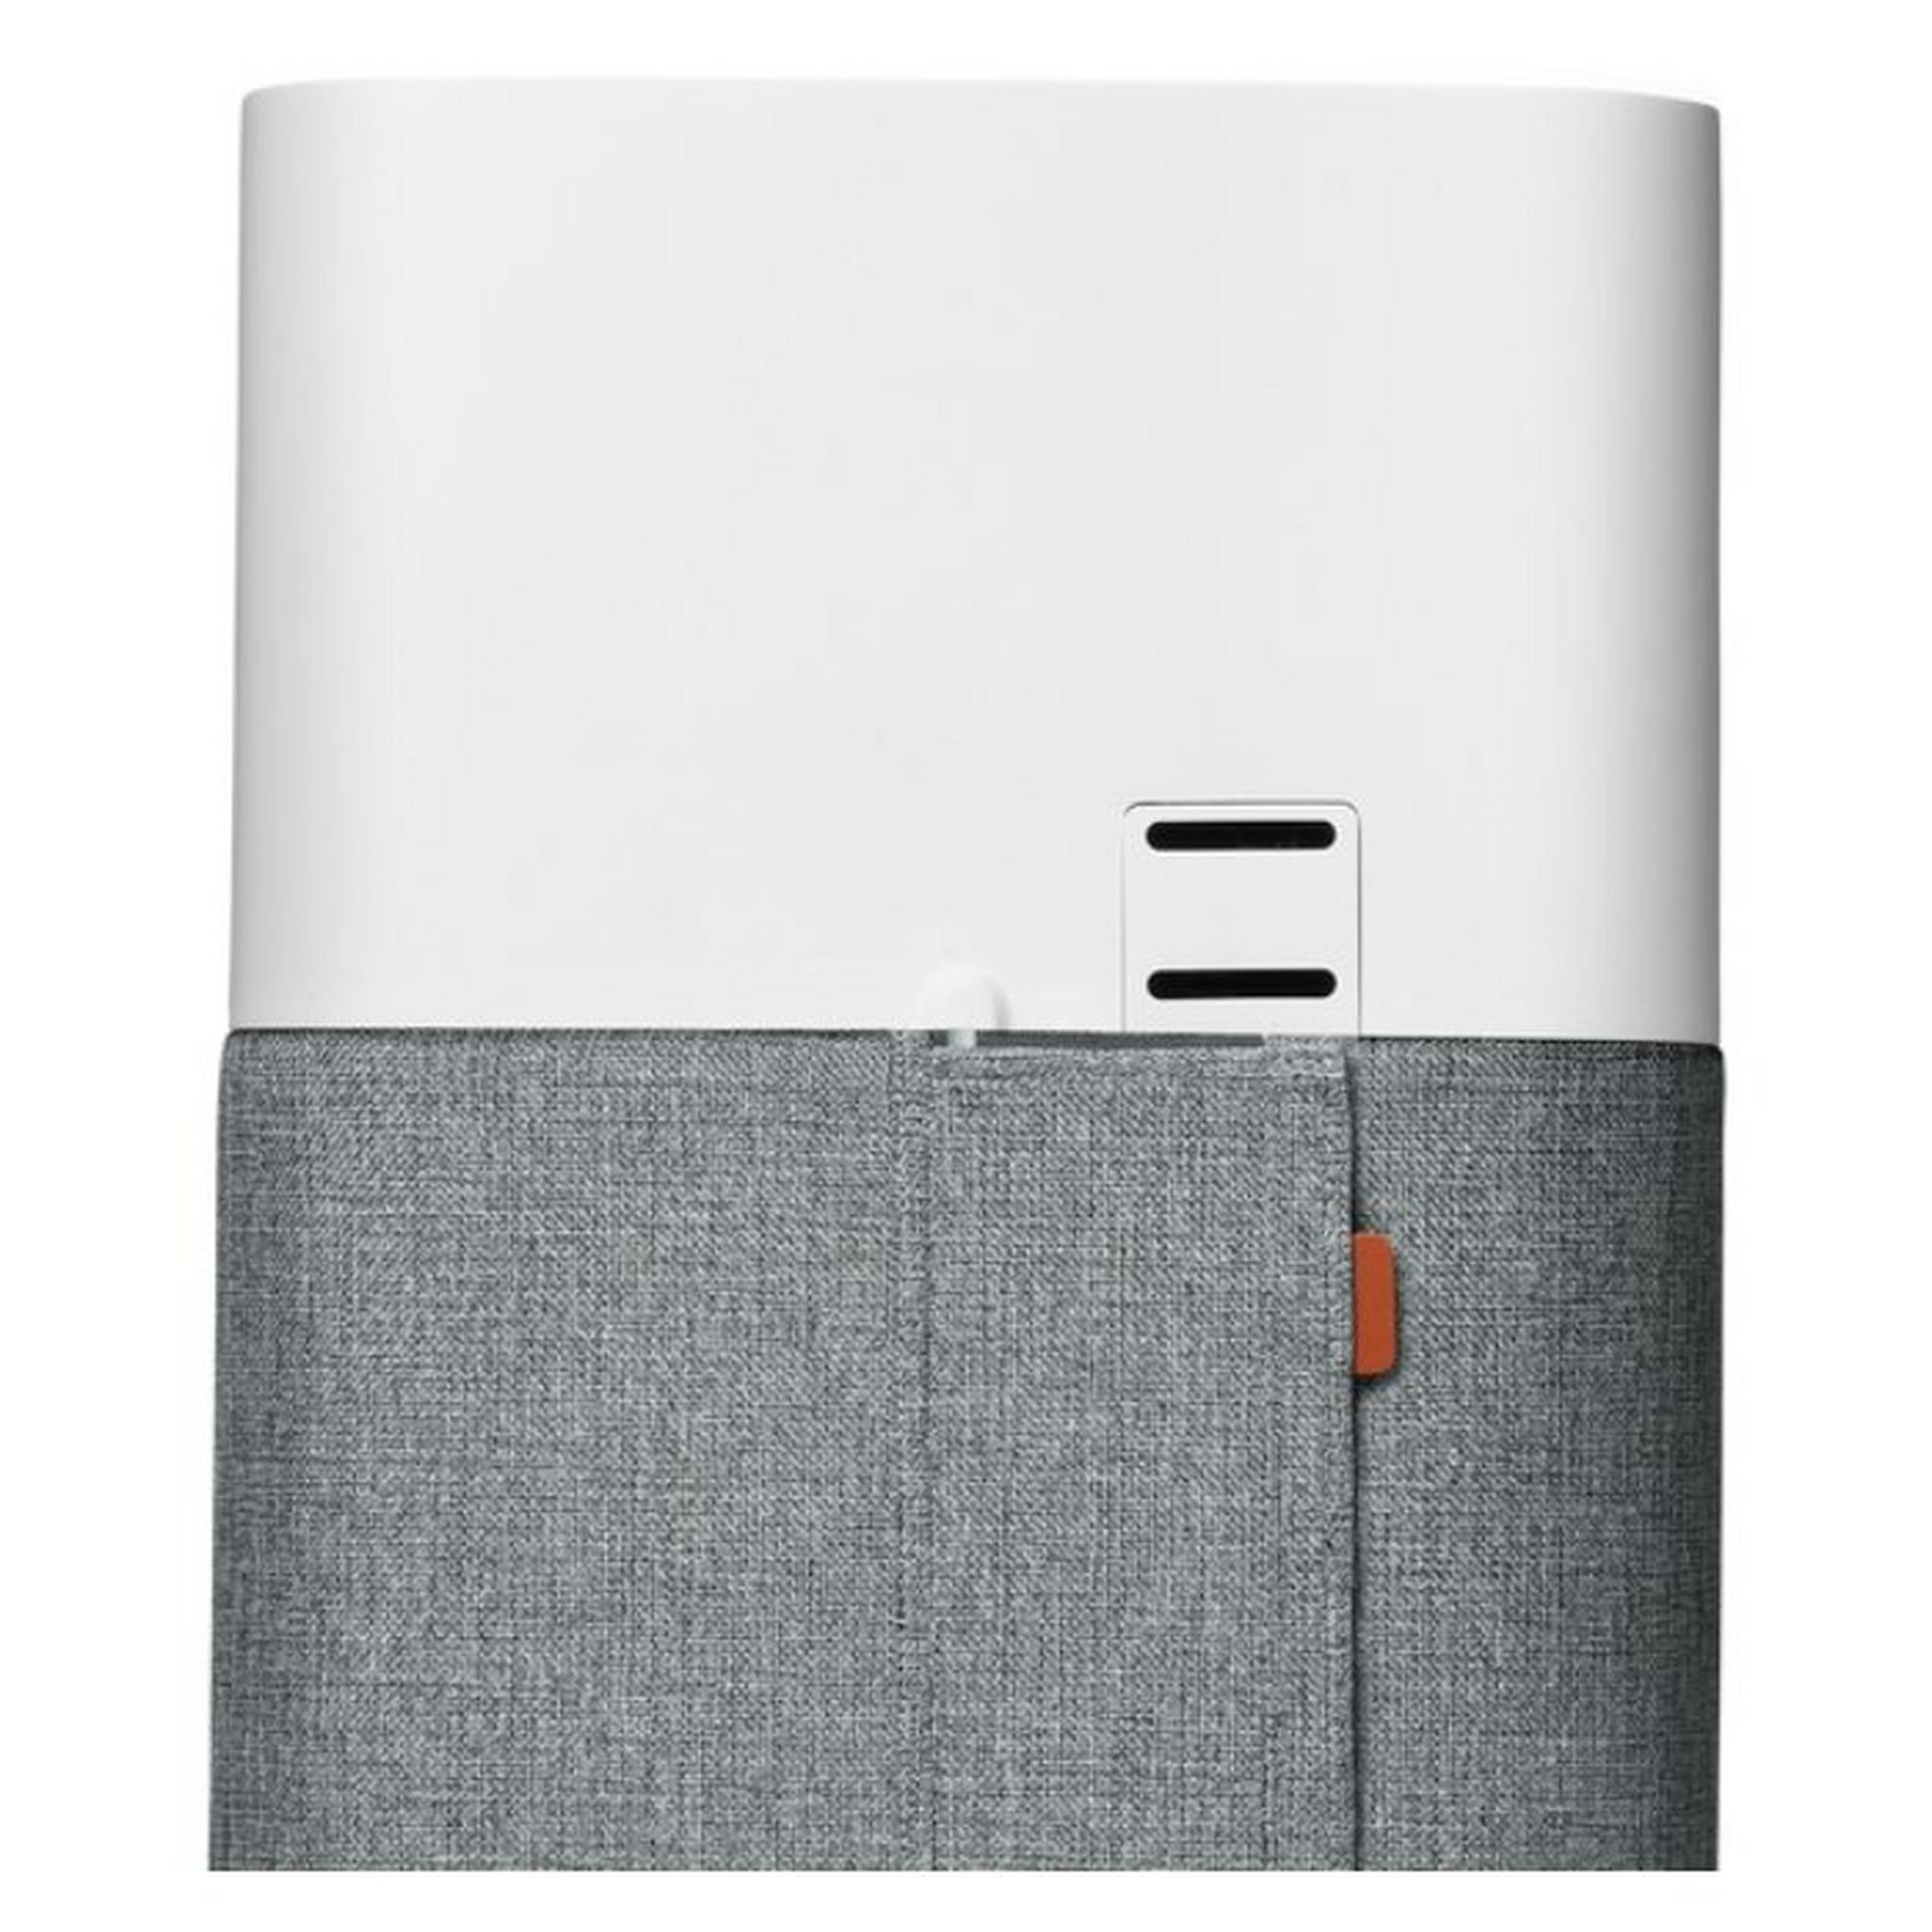 Blueair 3610 Air Purifier Combination Particle + Carbon filter, 106242 - White/Grey